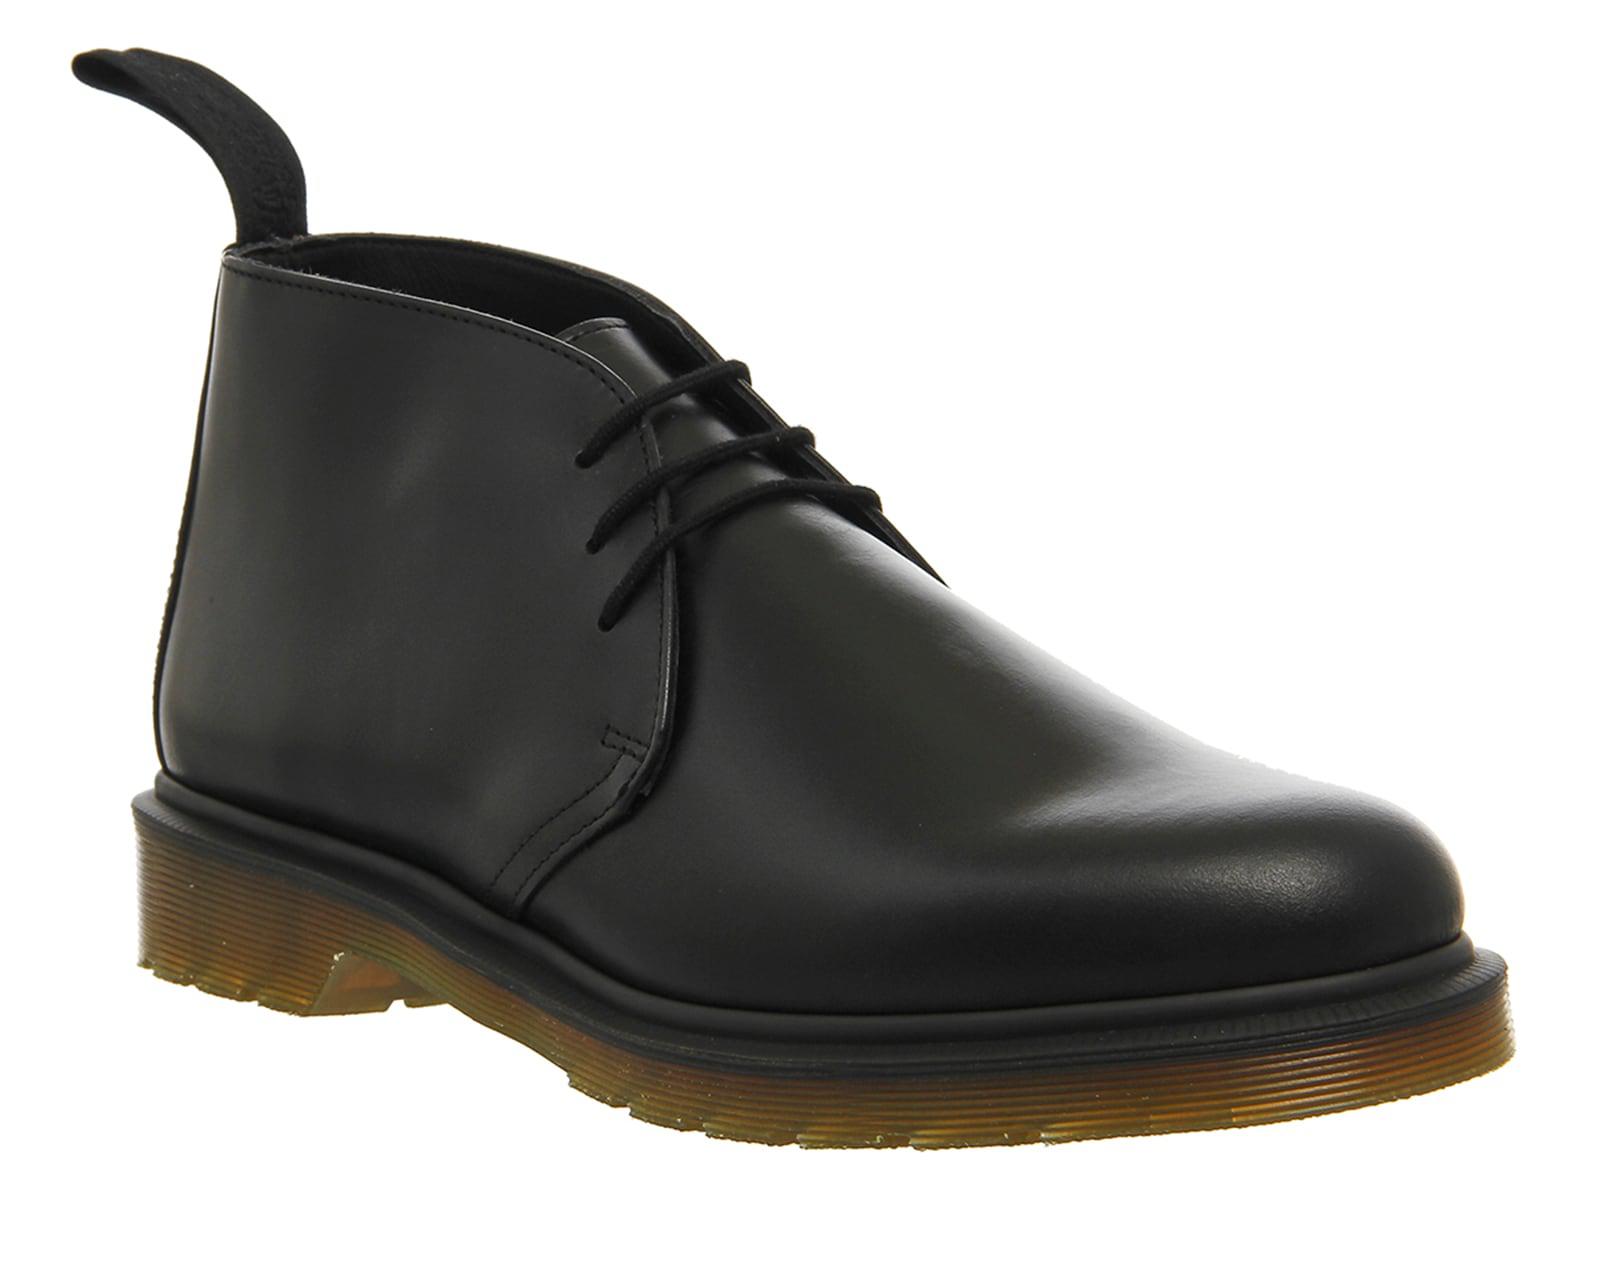 Dr. Martens Core Ray Chukka in Black for Men - Lyst